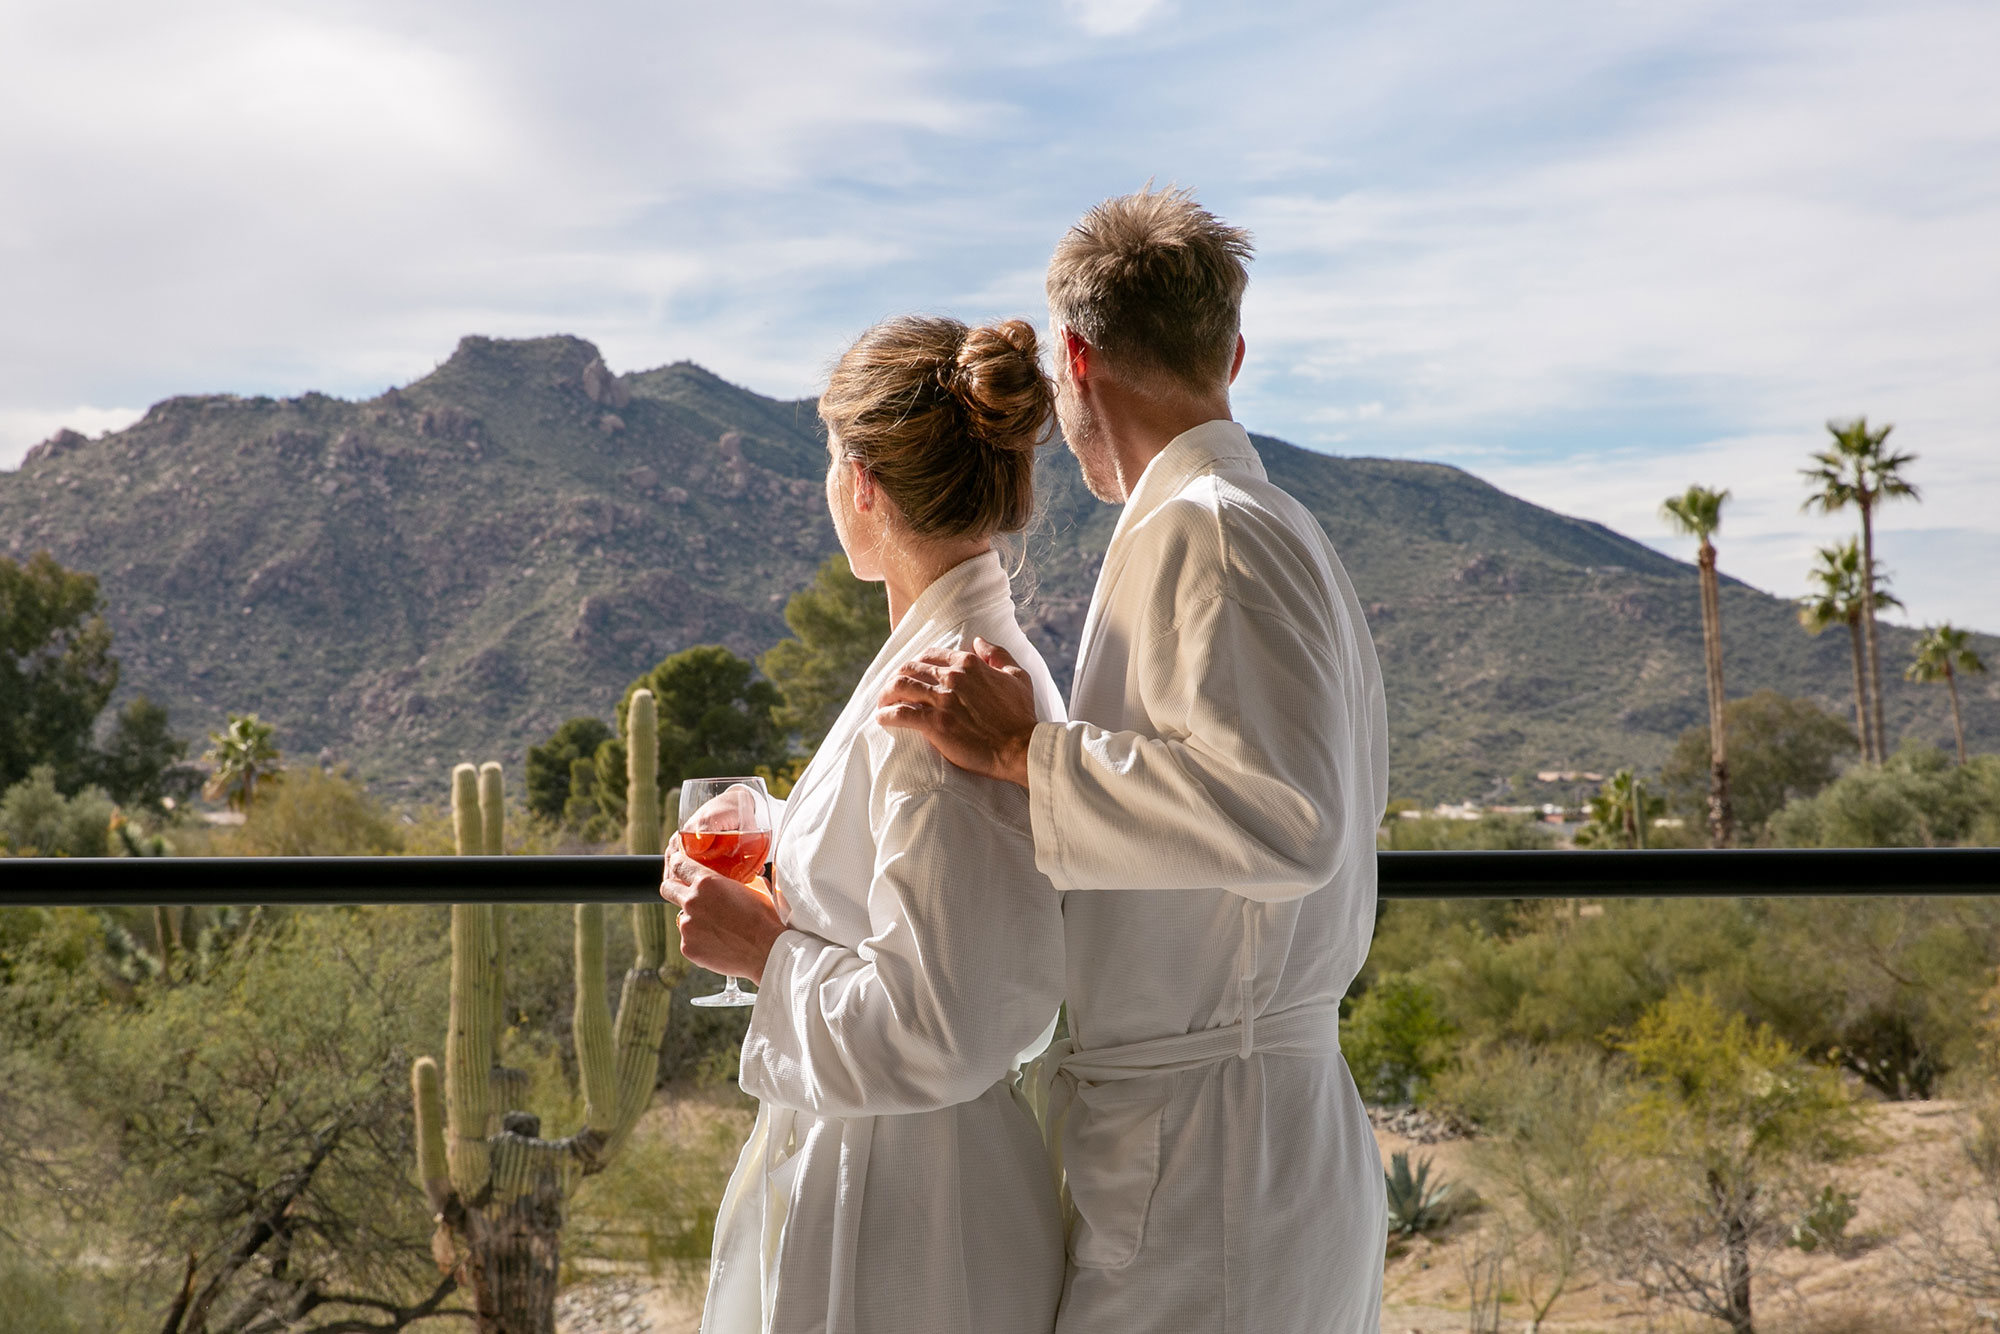 Who Leads Relationship Retreats for Couples?